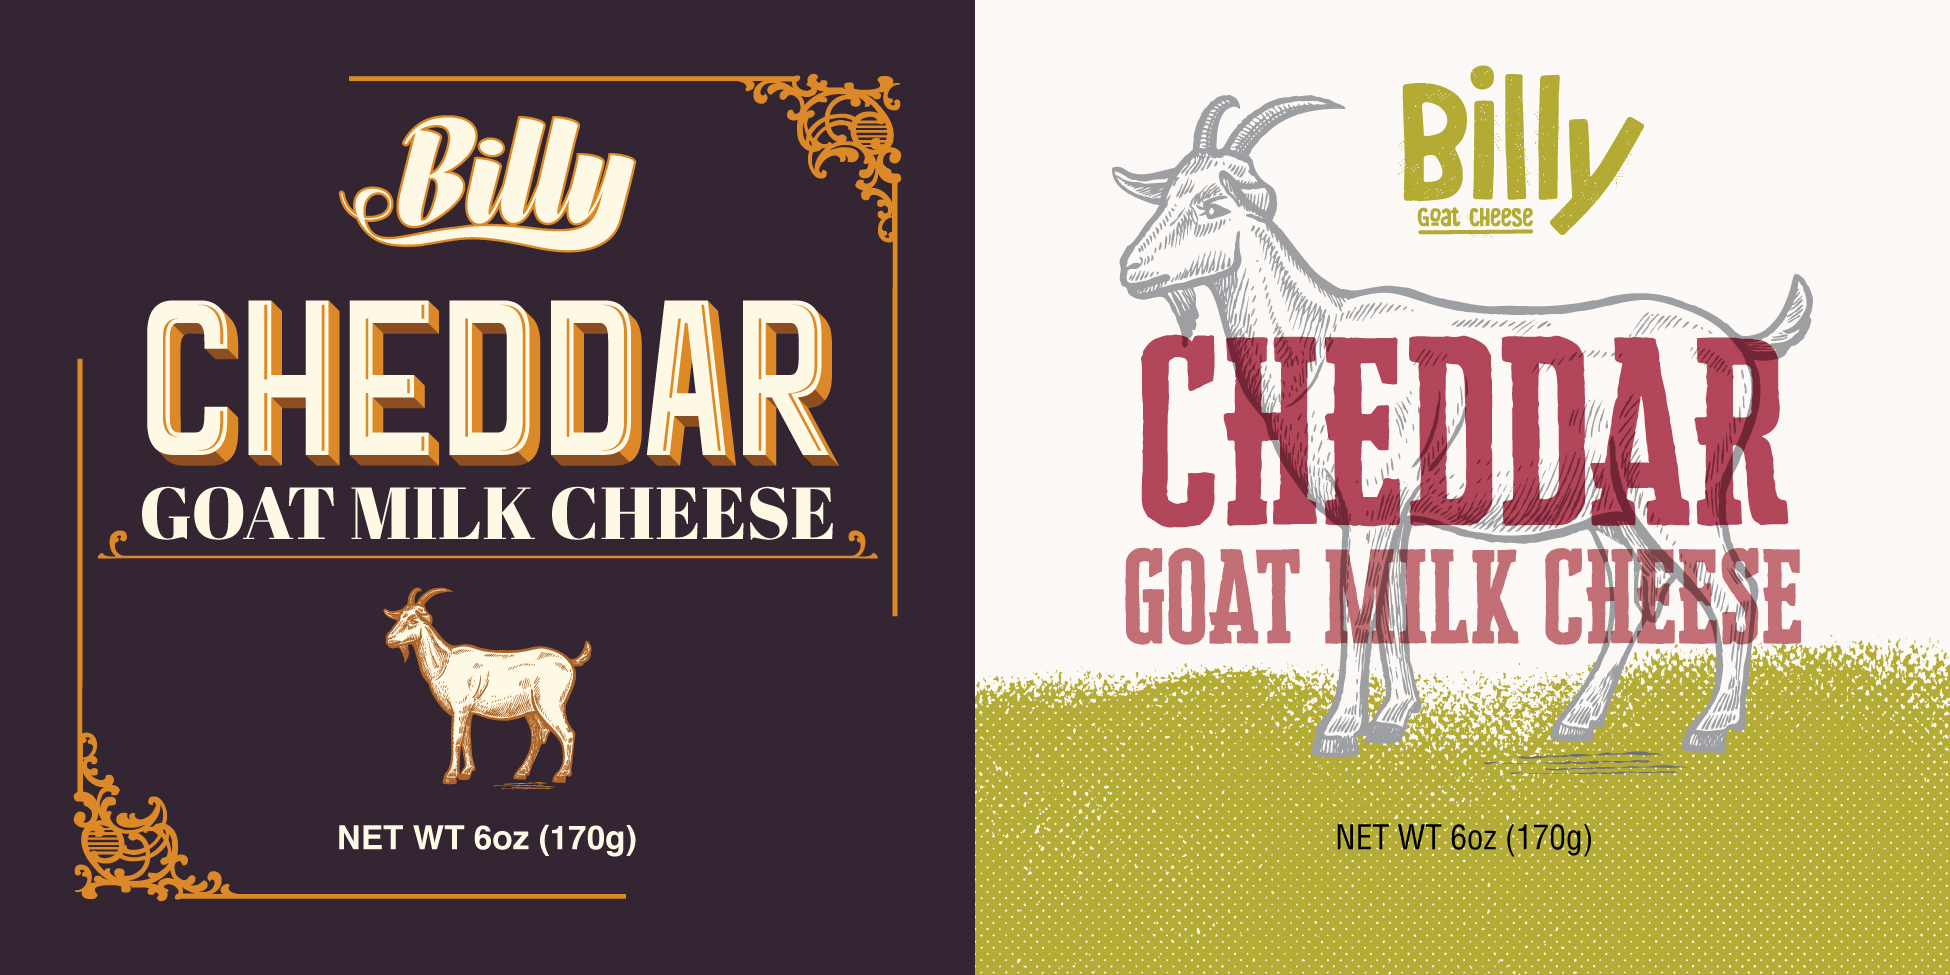 Billy Goat Cheese